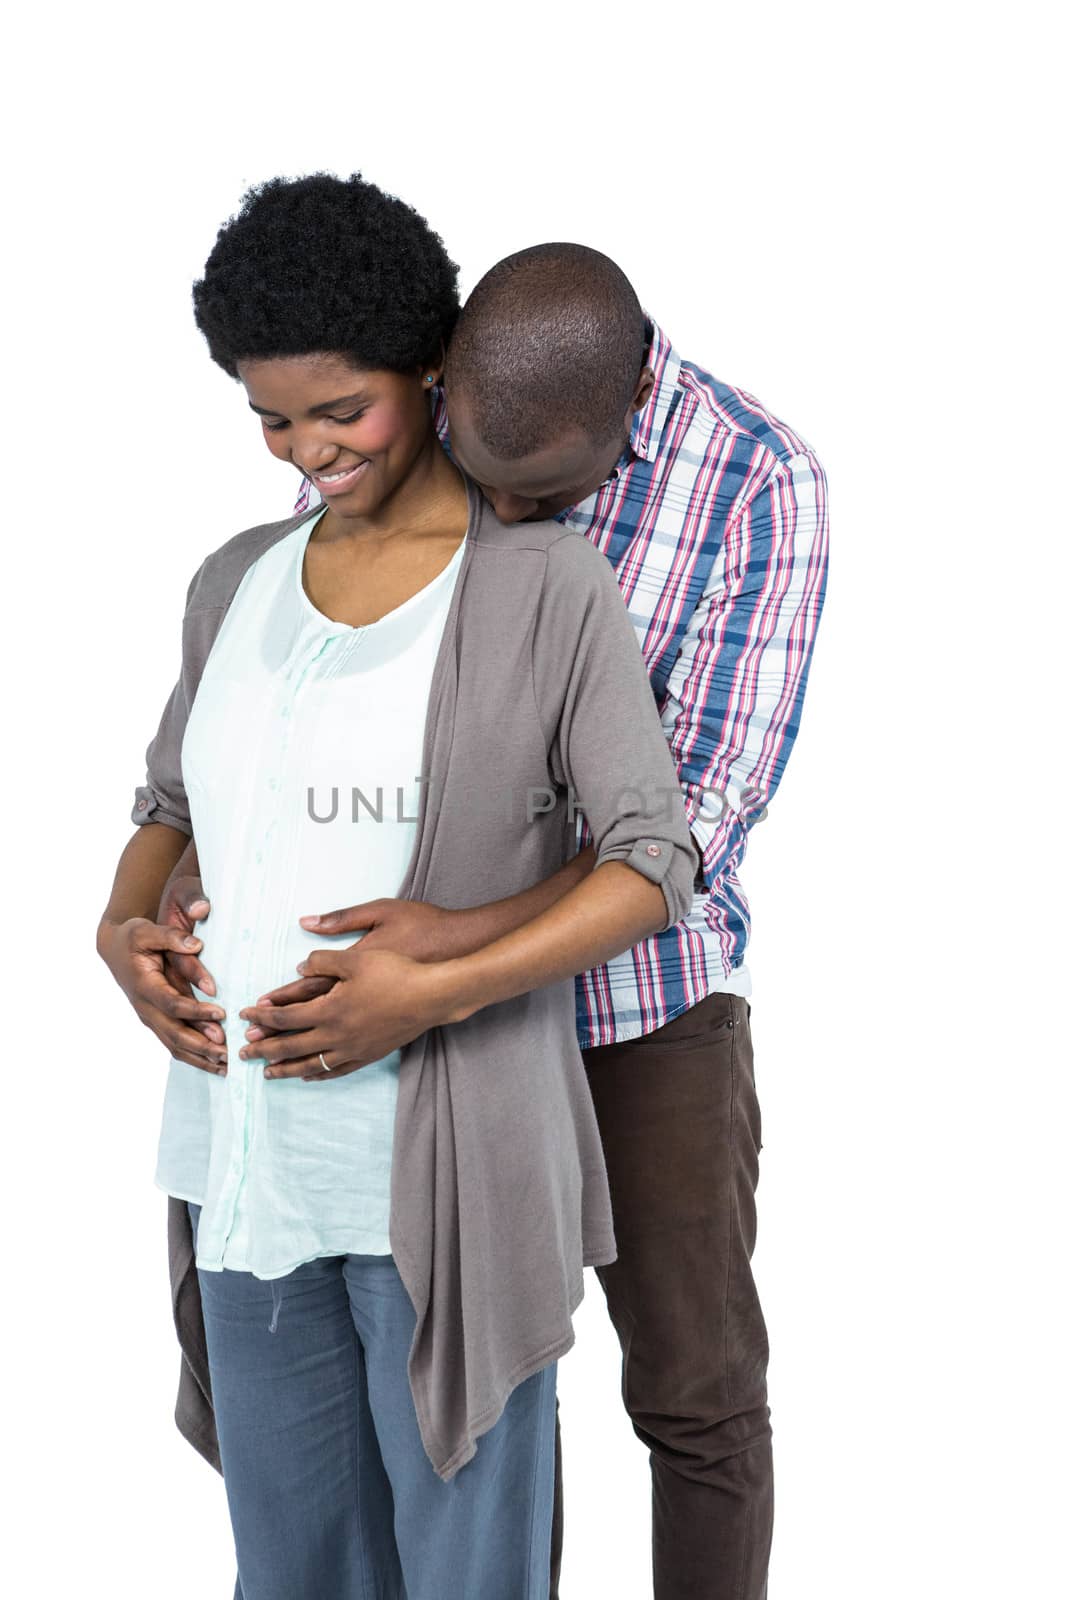 Pregnant couple smiling and embracing on white background